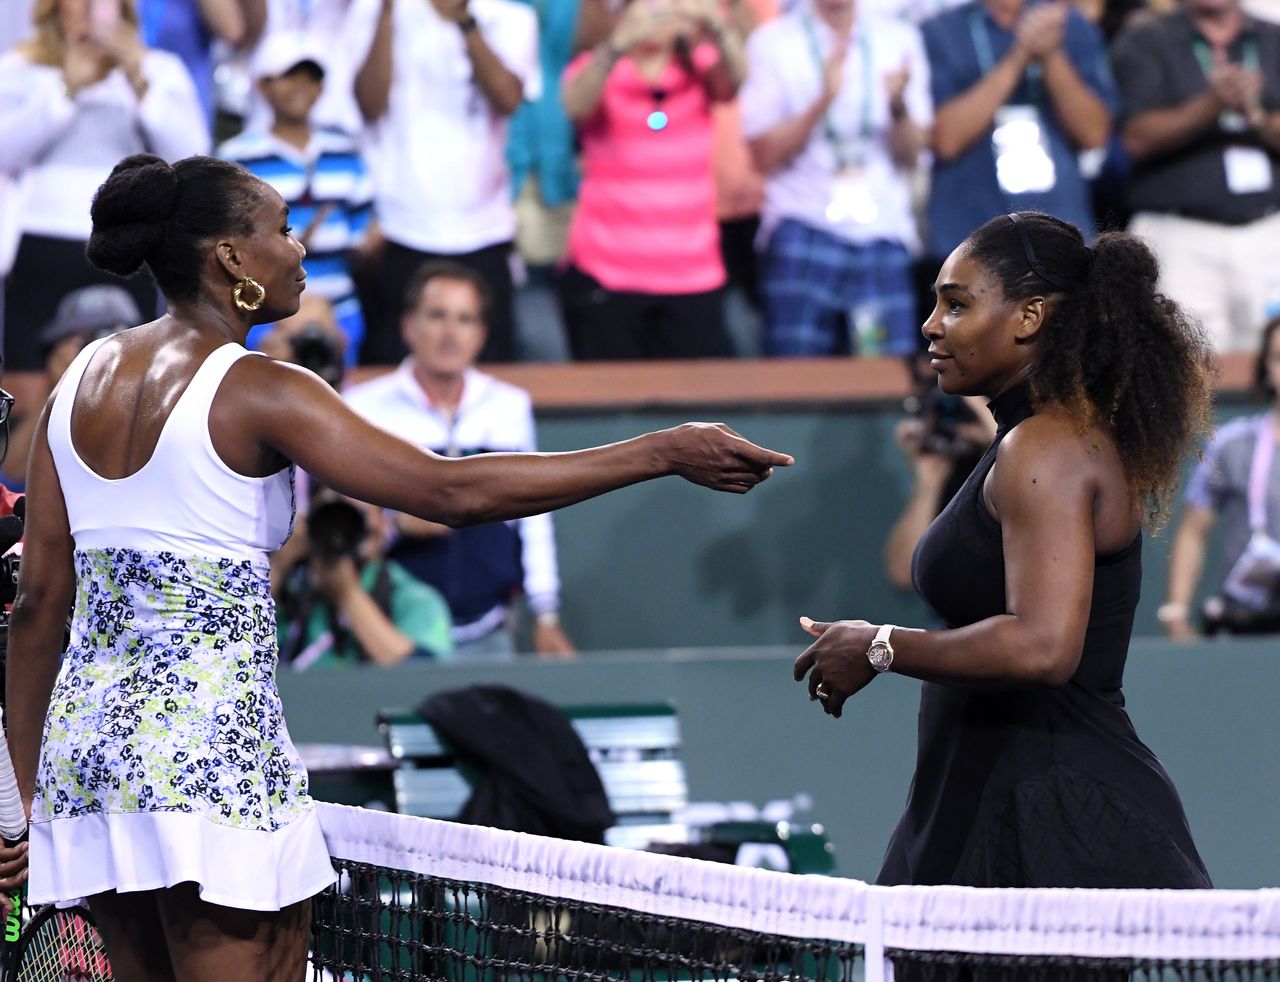 Venus Williams (L) hugs Serena Williams after her win over her sister during Day 8 of BNP Paribas Open on March 12, 2018 in Indian Wells, California.